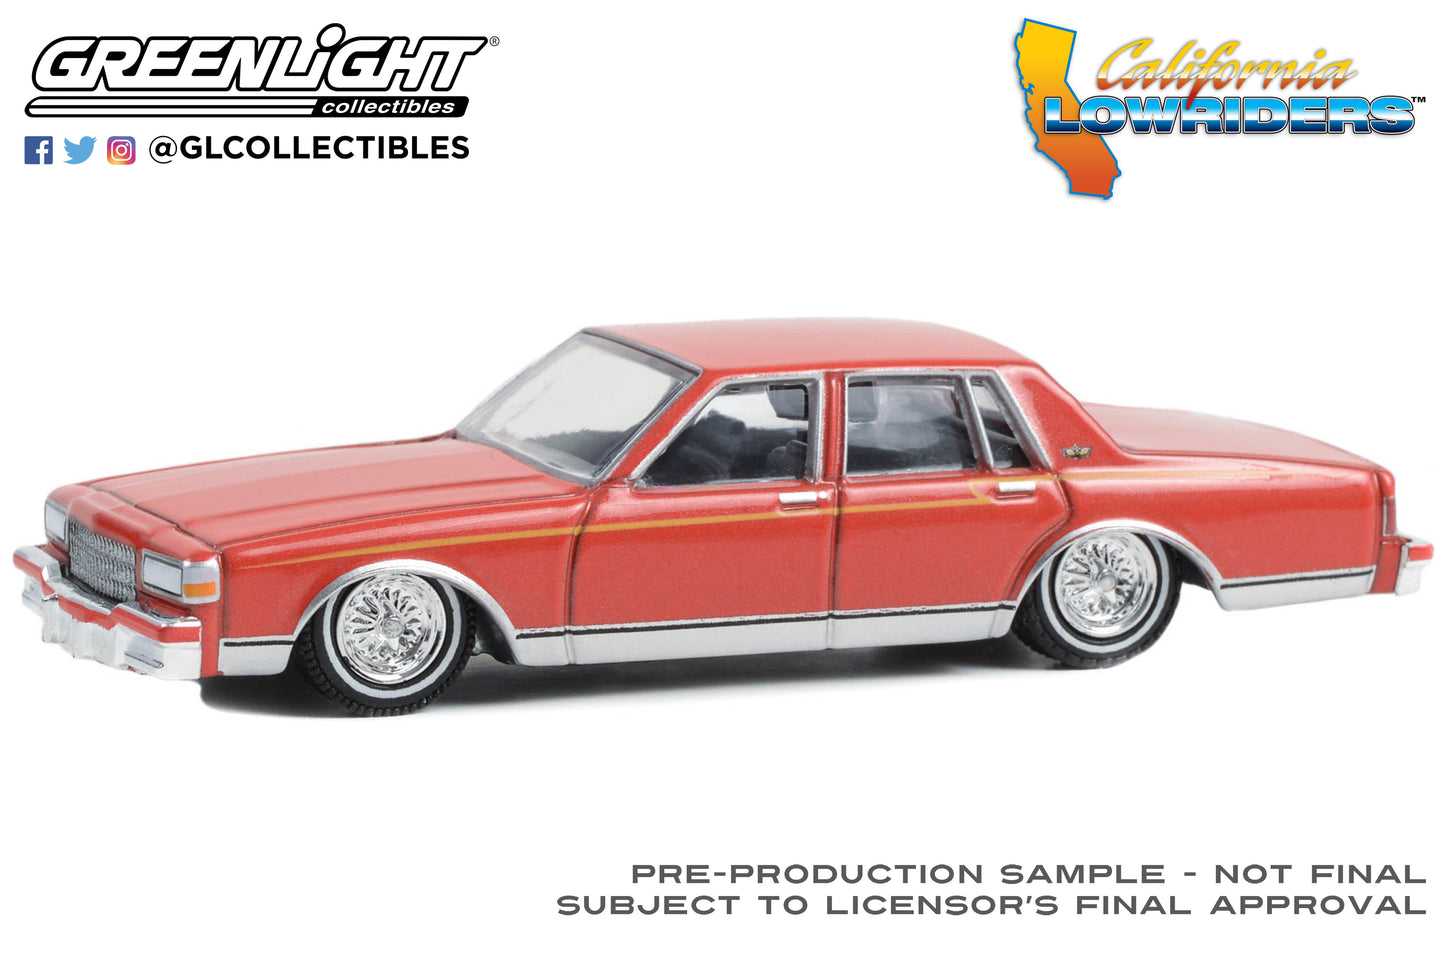 GreenLight 1:64 California Lowriders Series 3 - 1989 Chevrolet Caprice Classic - Custom Red with Yellow Stripes 63040-F